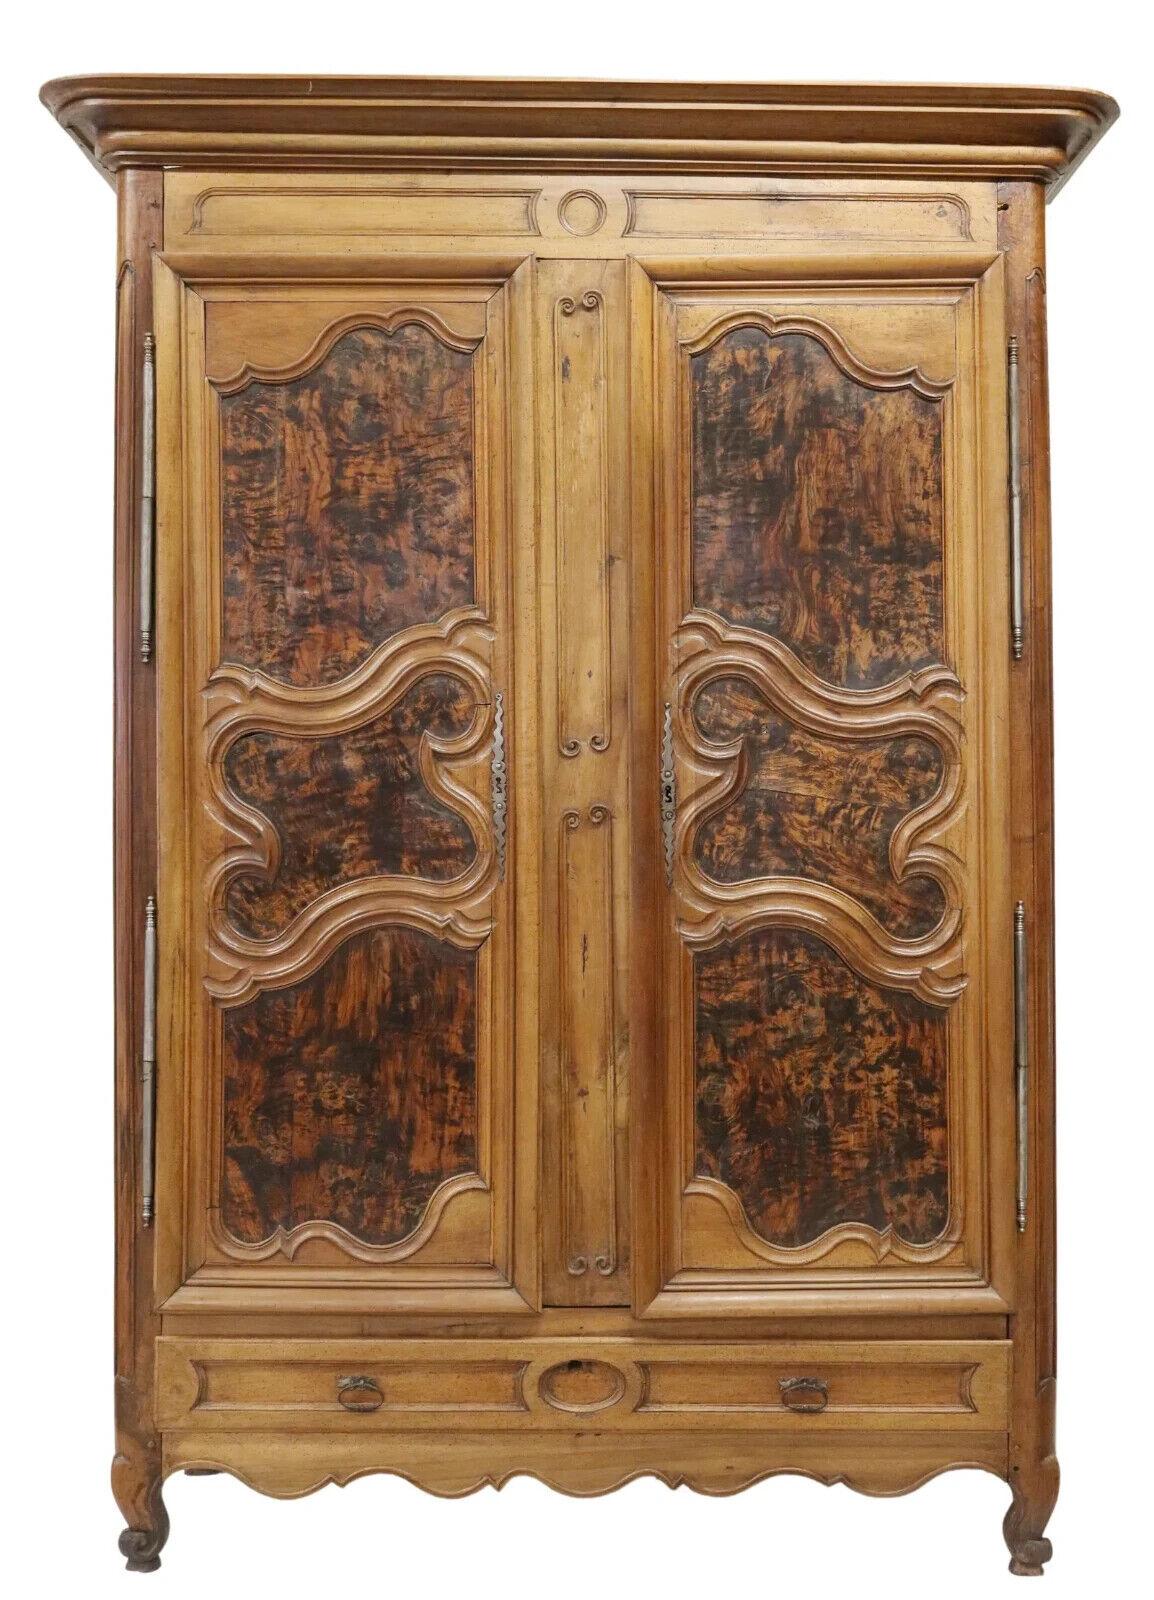 Beautiful antique Armoire, French Provincial, Louis XV style, walnut, shelves, drawer, 1800s, 19th century. Great for storing clothing and other bedroom items

French Provincial Louis XV style walnut armoire, 19th century, having molded cornice,